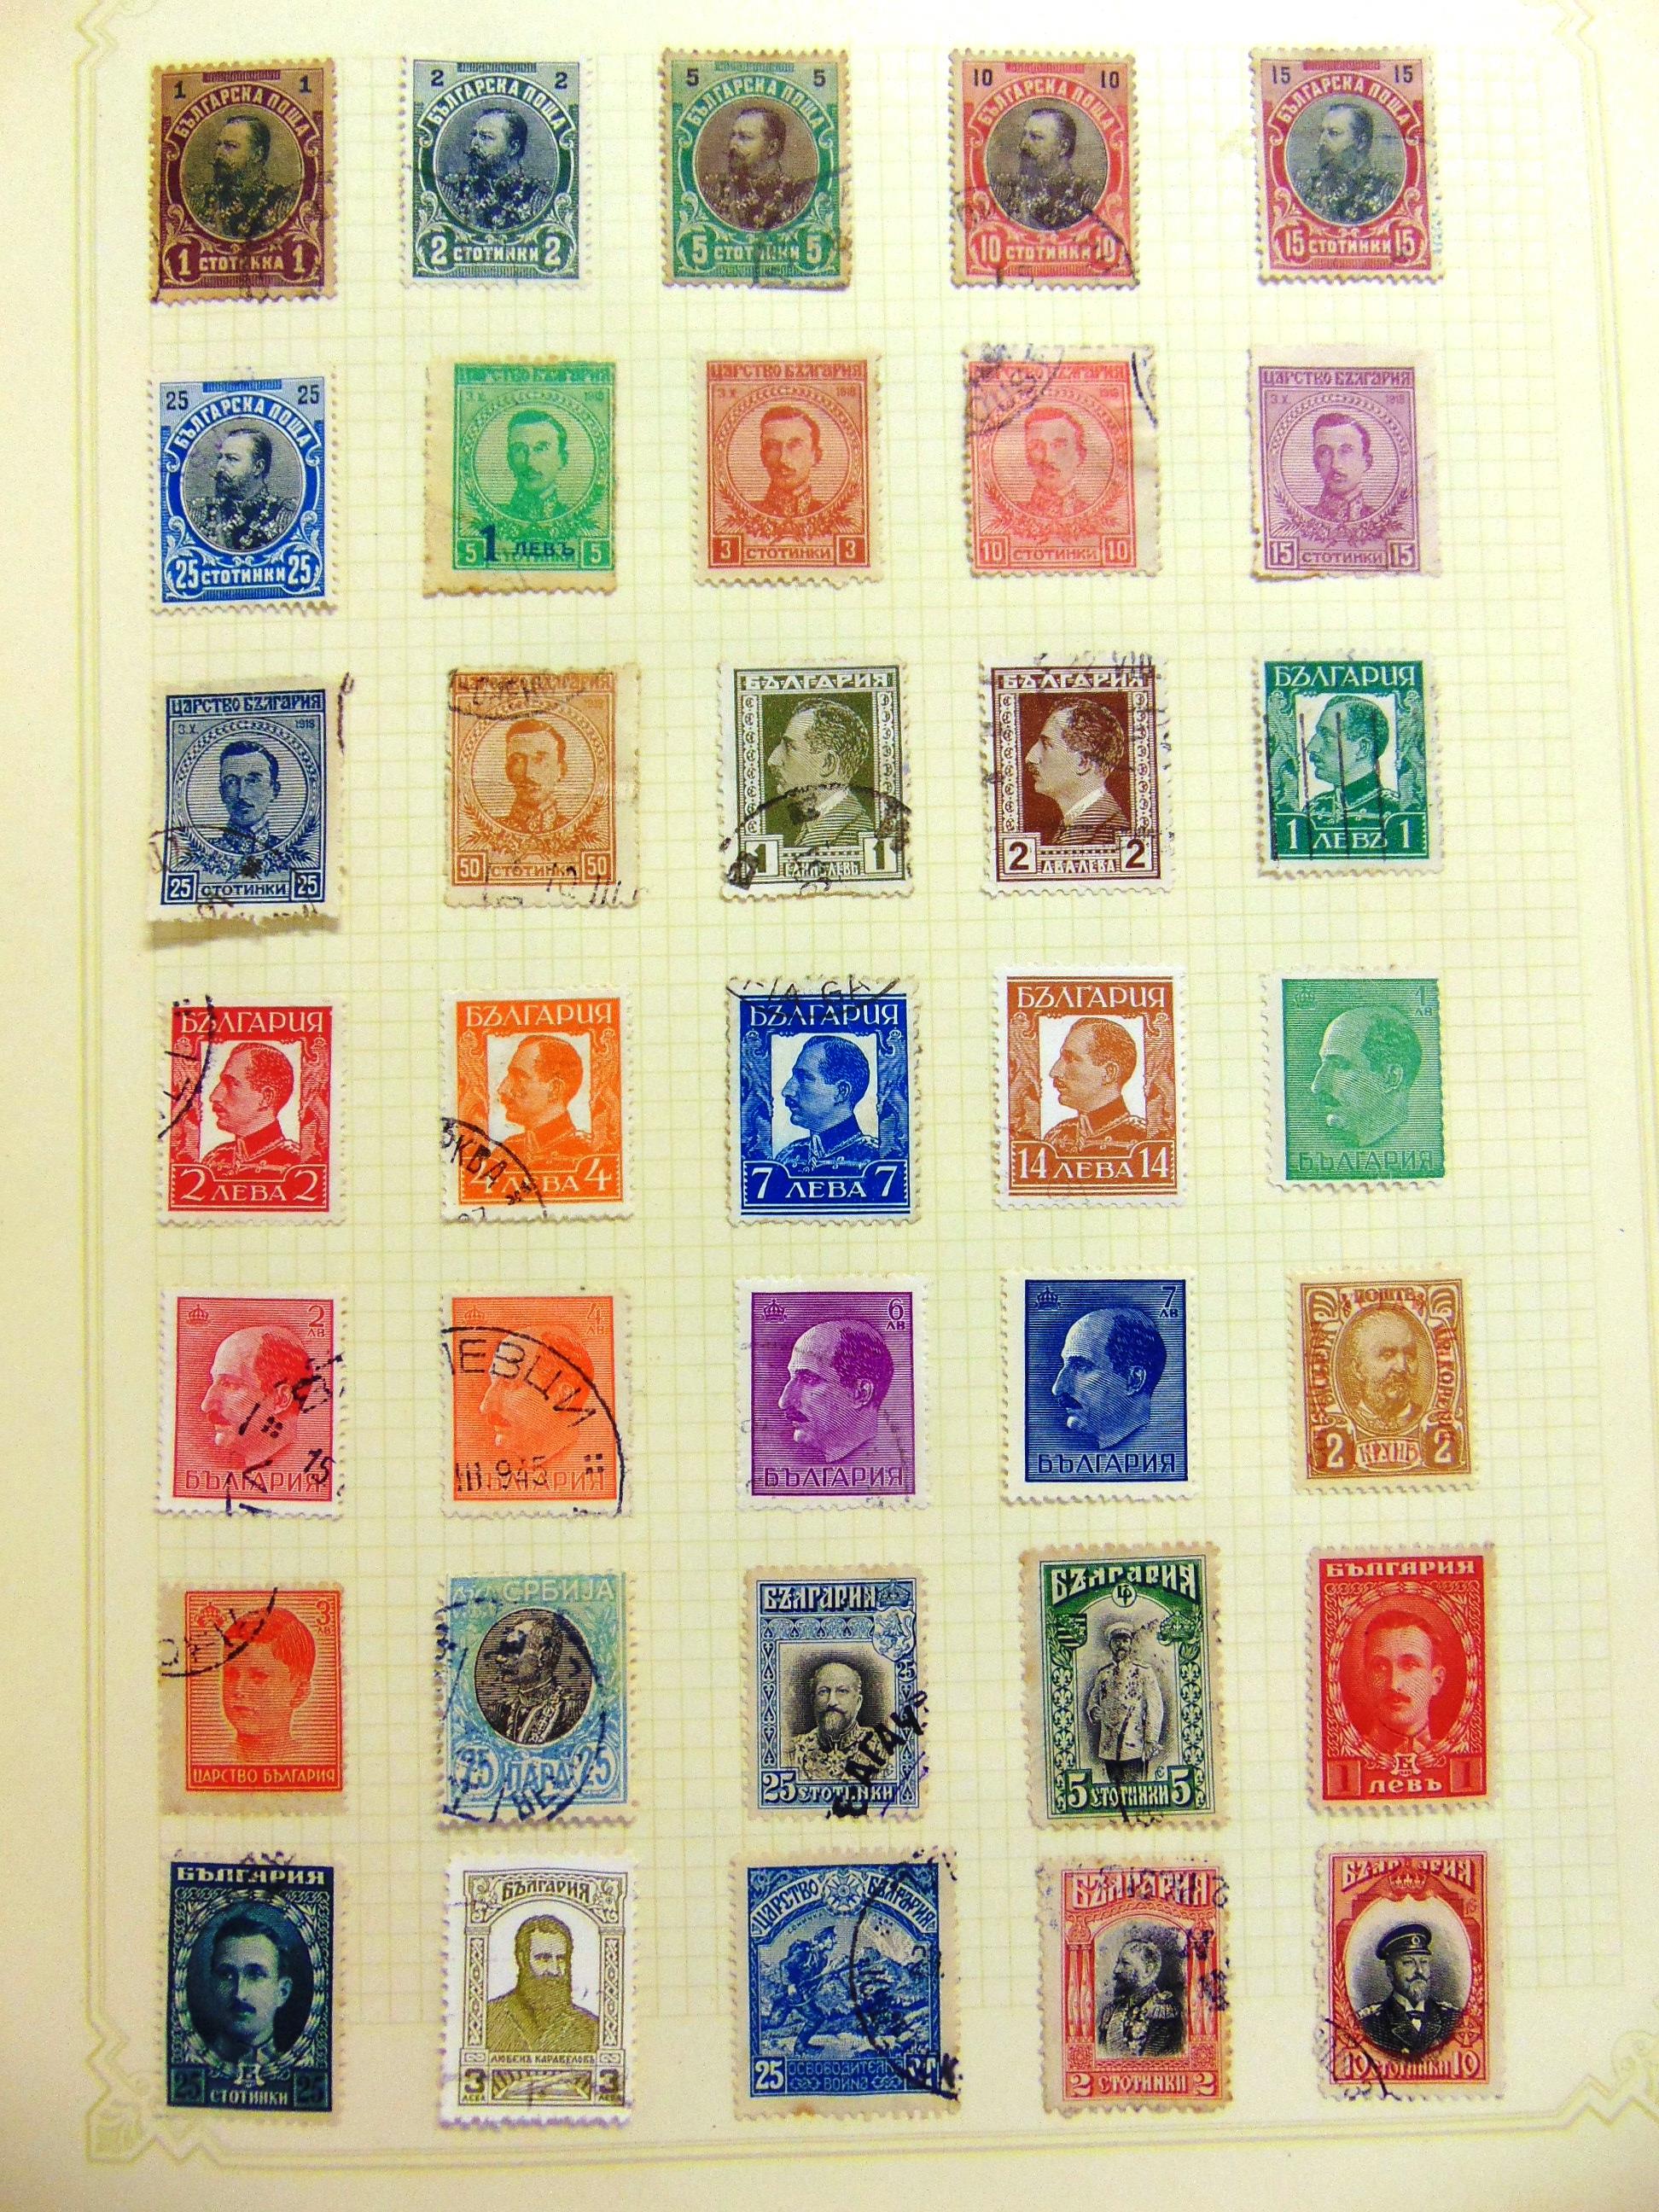 STAMPS - A PART-WORLD COLLECTION with noted Bulgaria, including also Australia, Canada and other